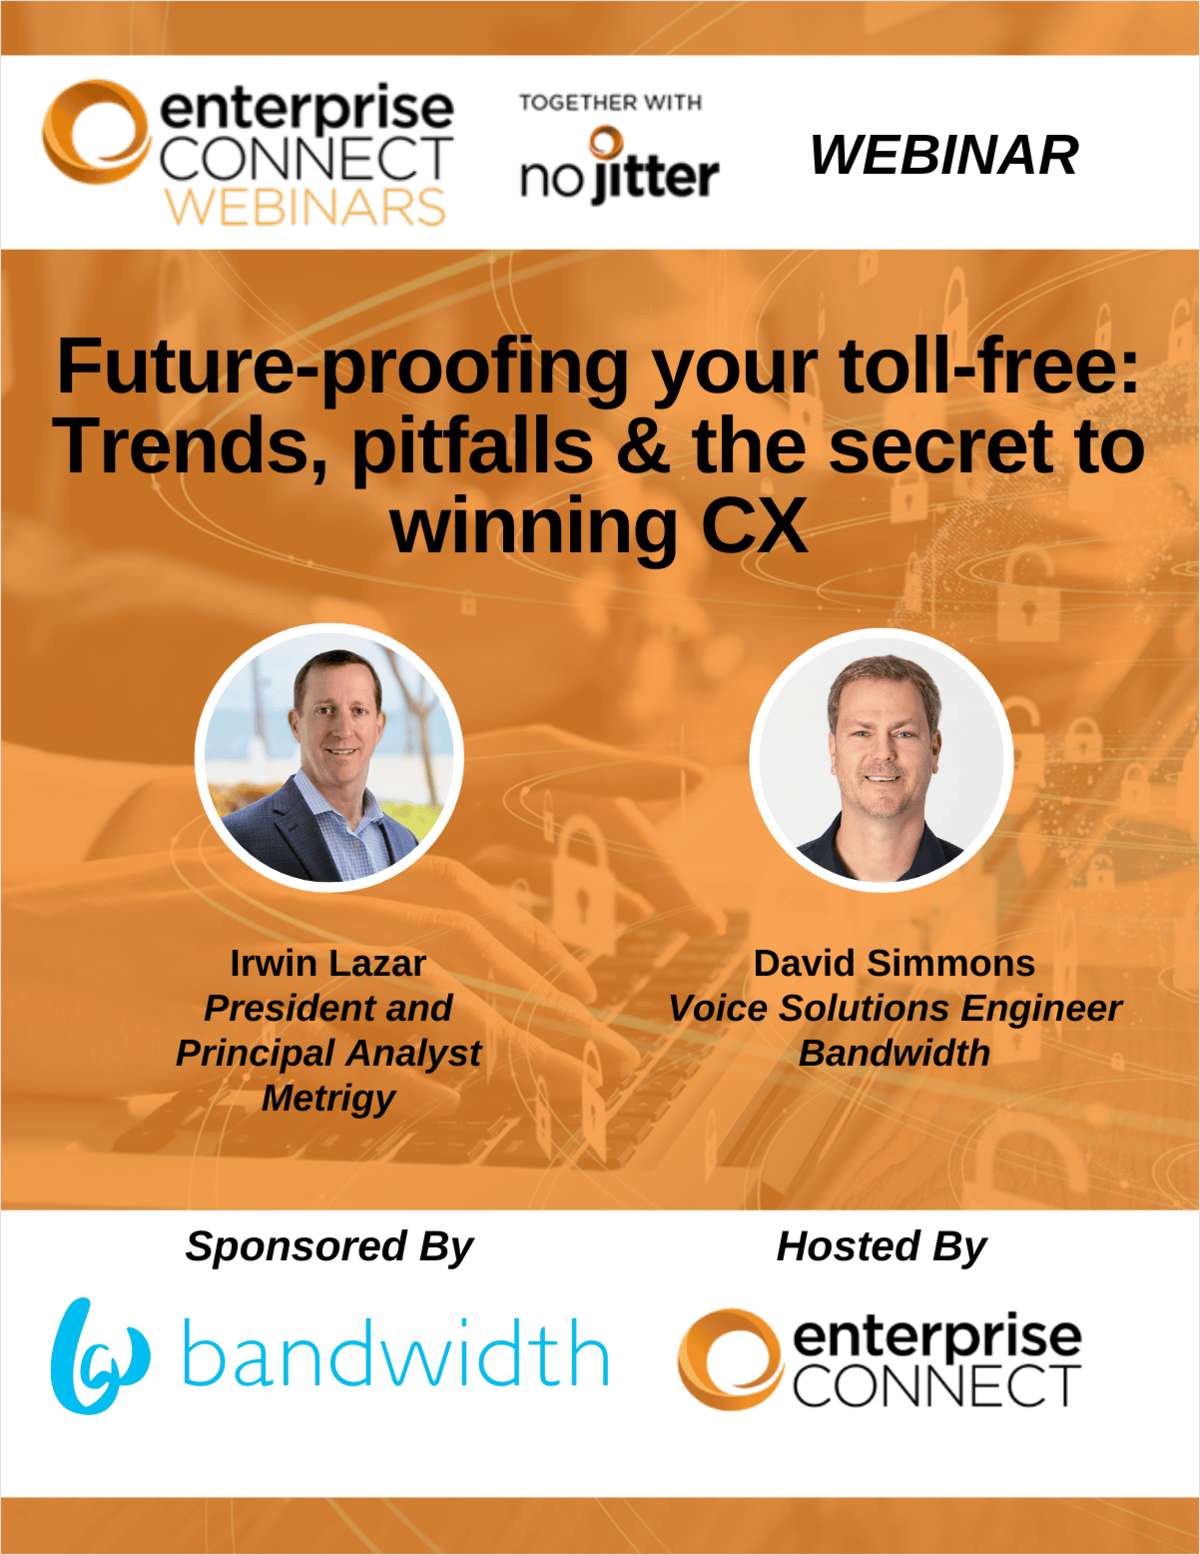 Future-proofing your toll-free: Trends, pitfalls & the secret to winning CX